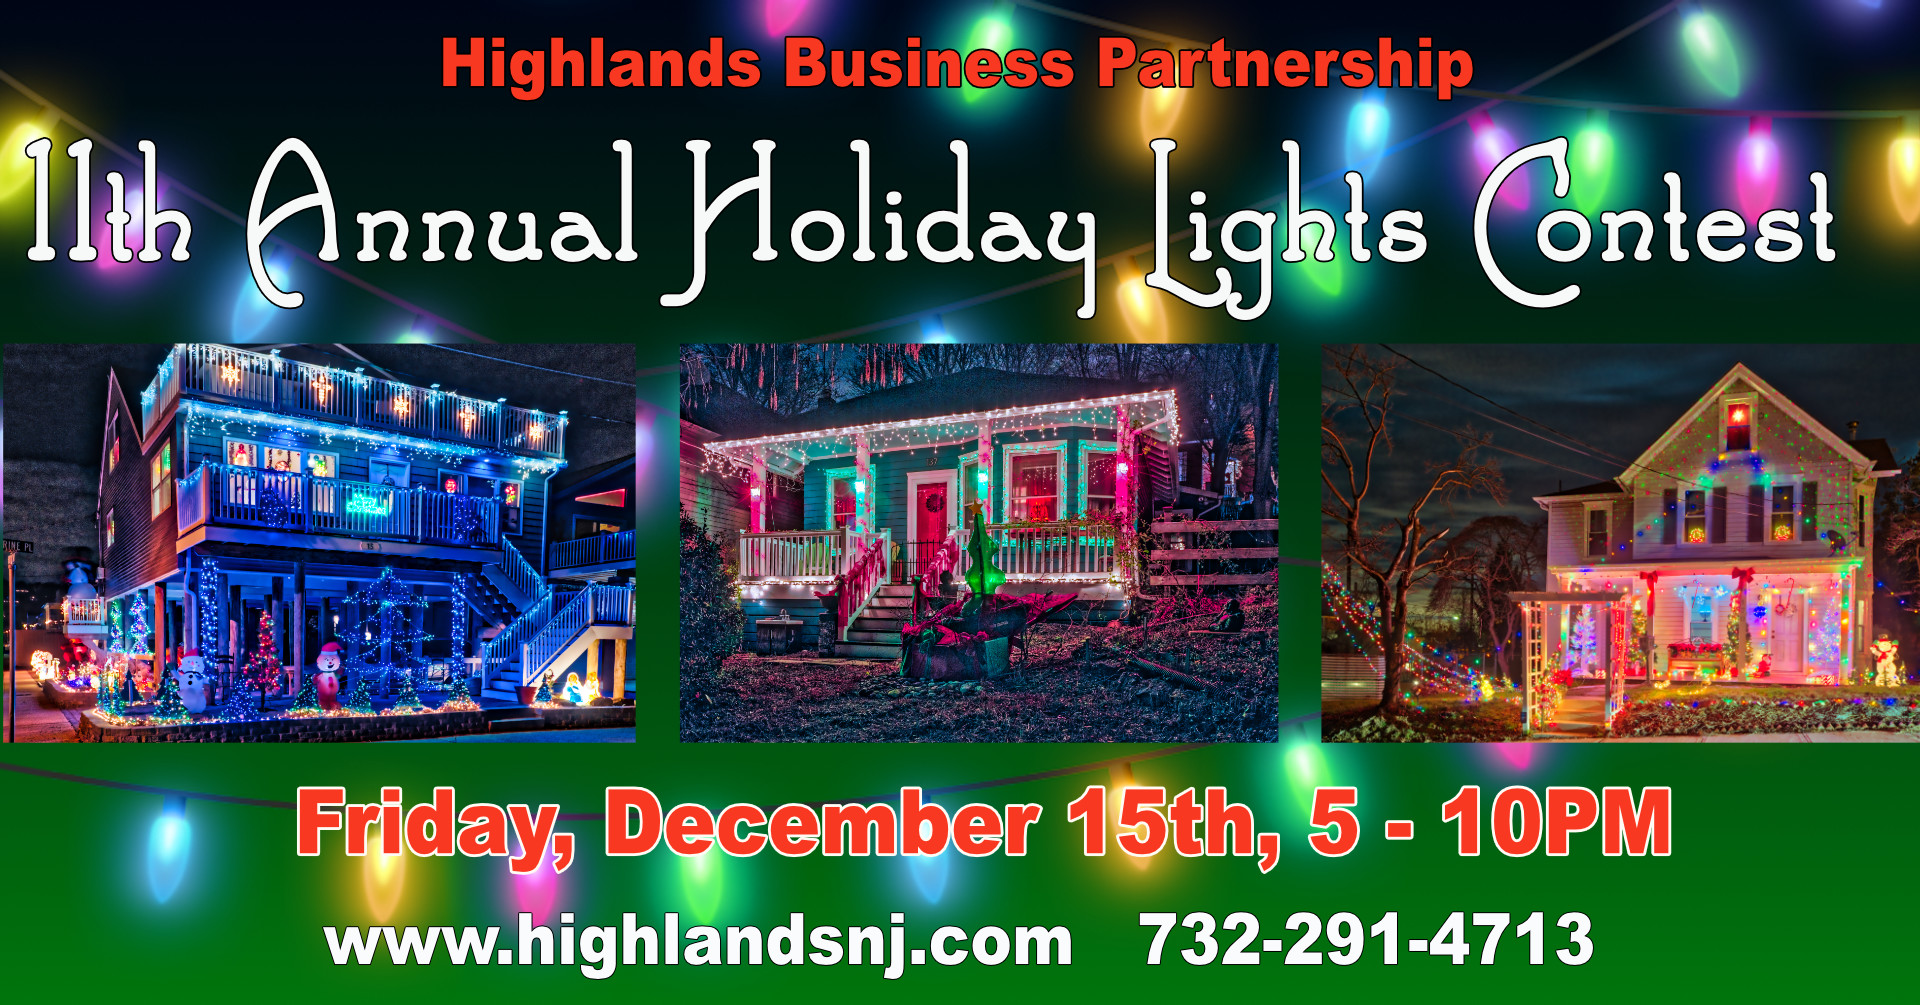 Highlands Annual Holiday Lights Contest